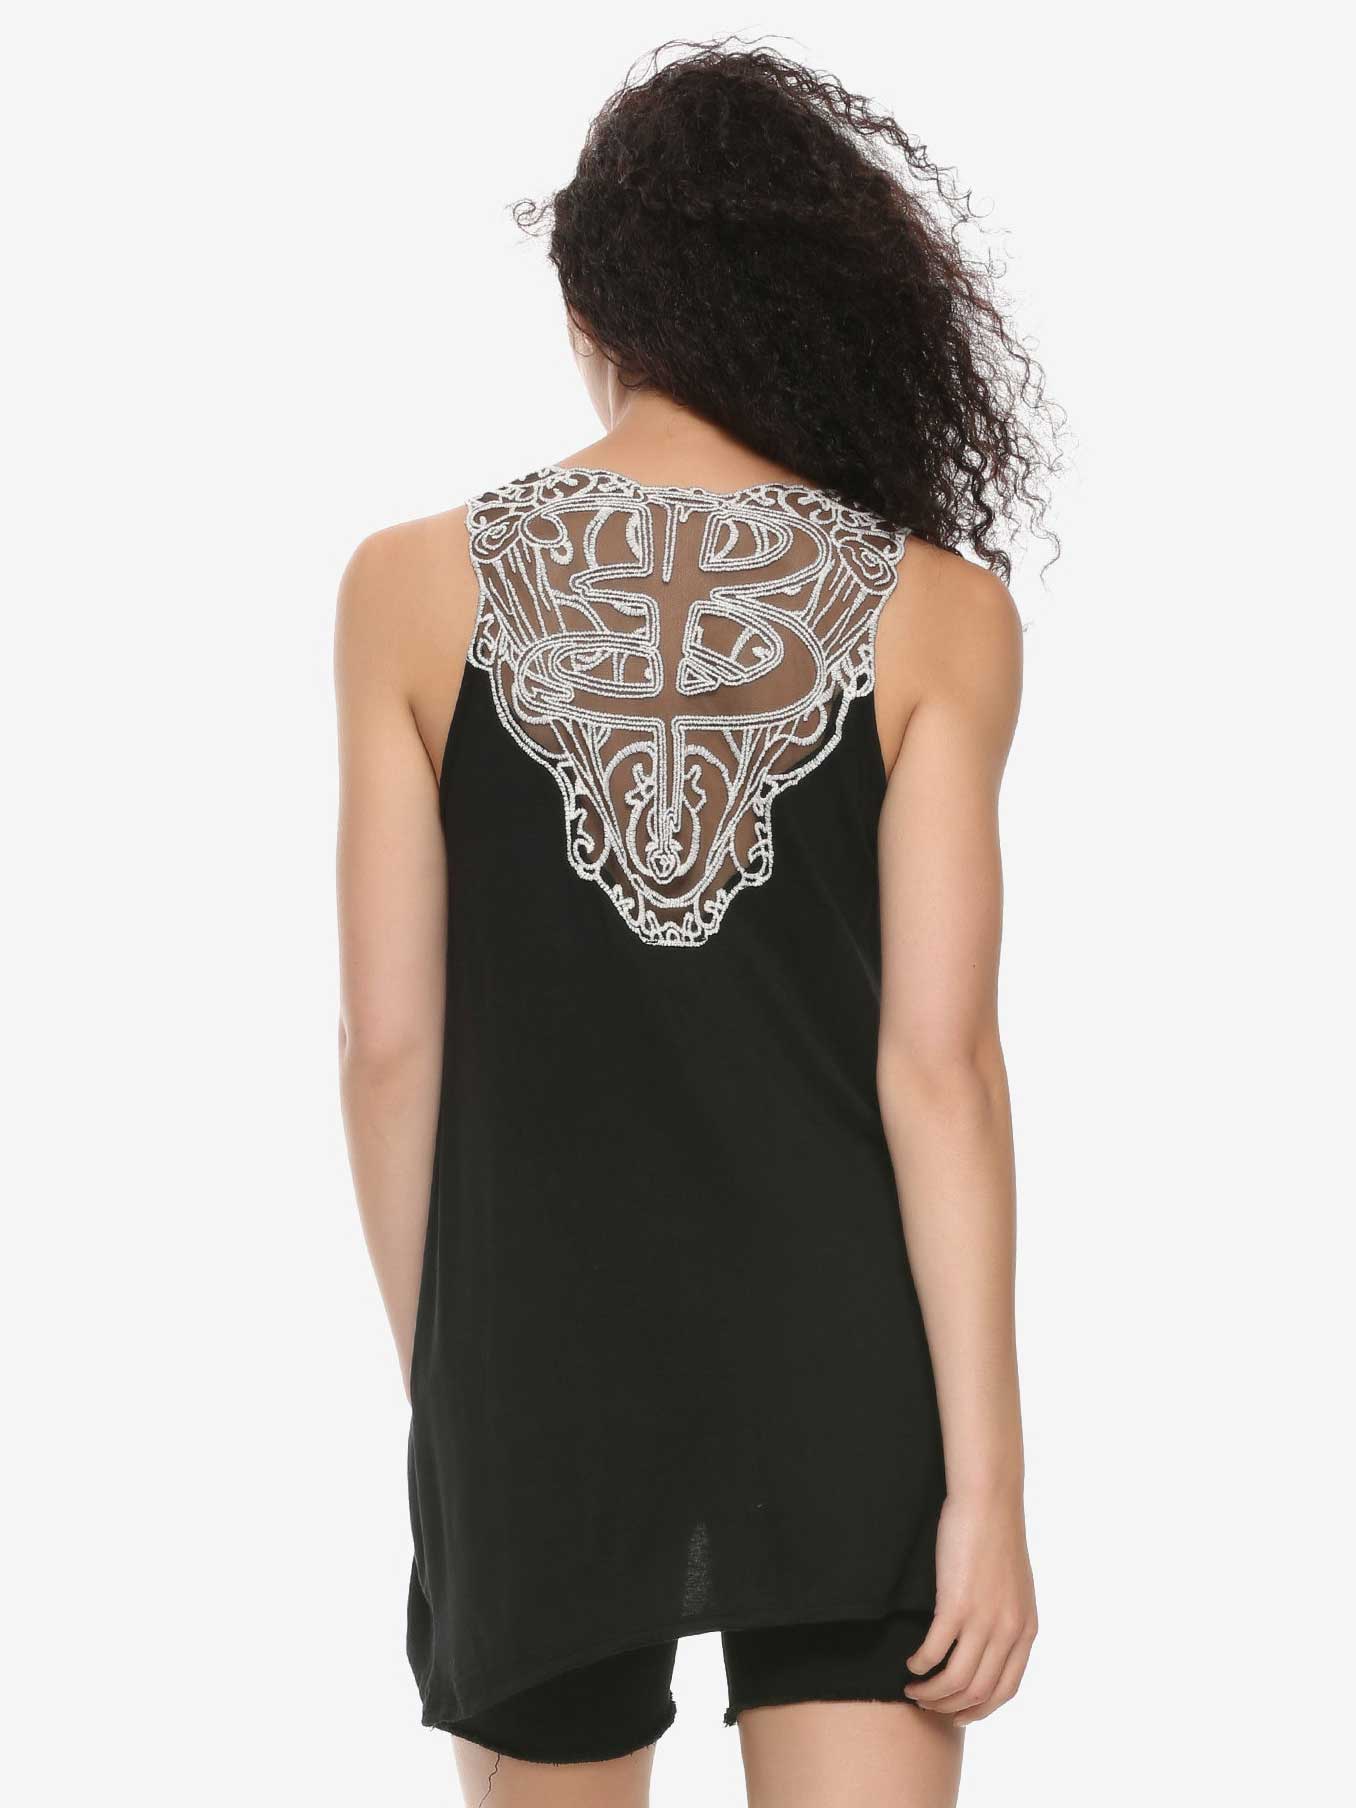 black tank with lace back design